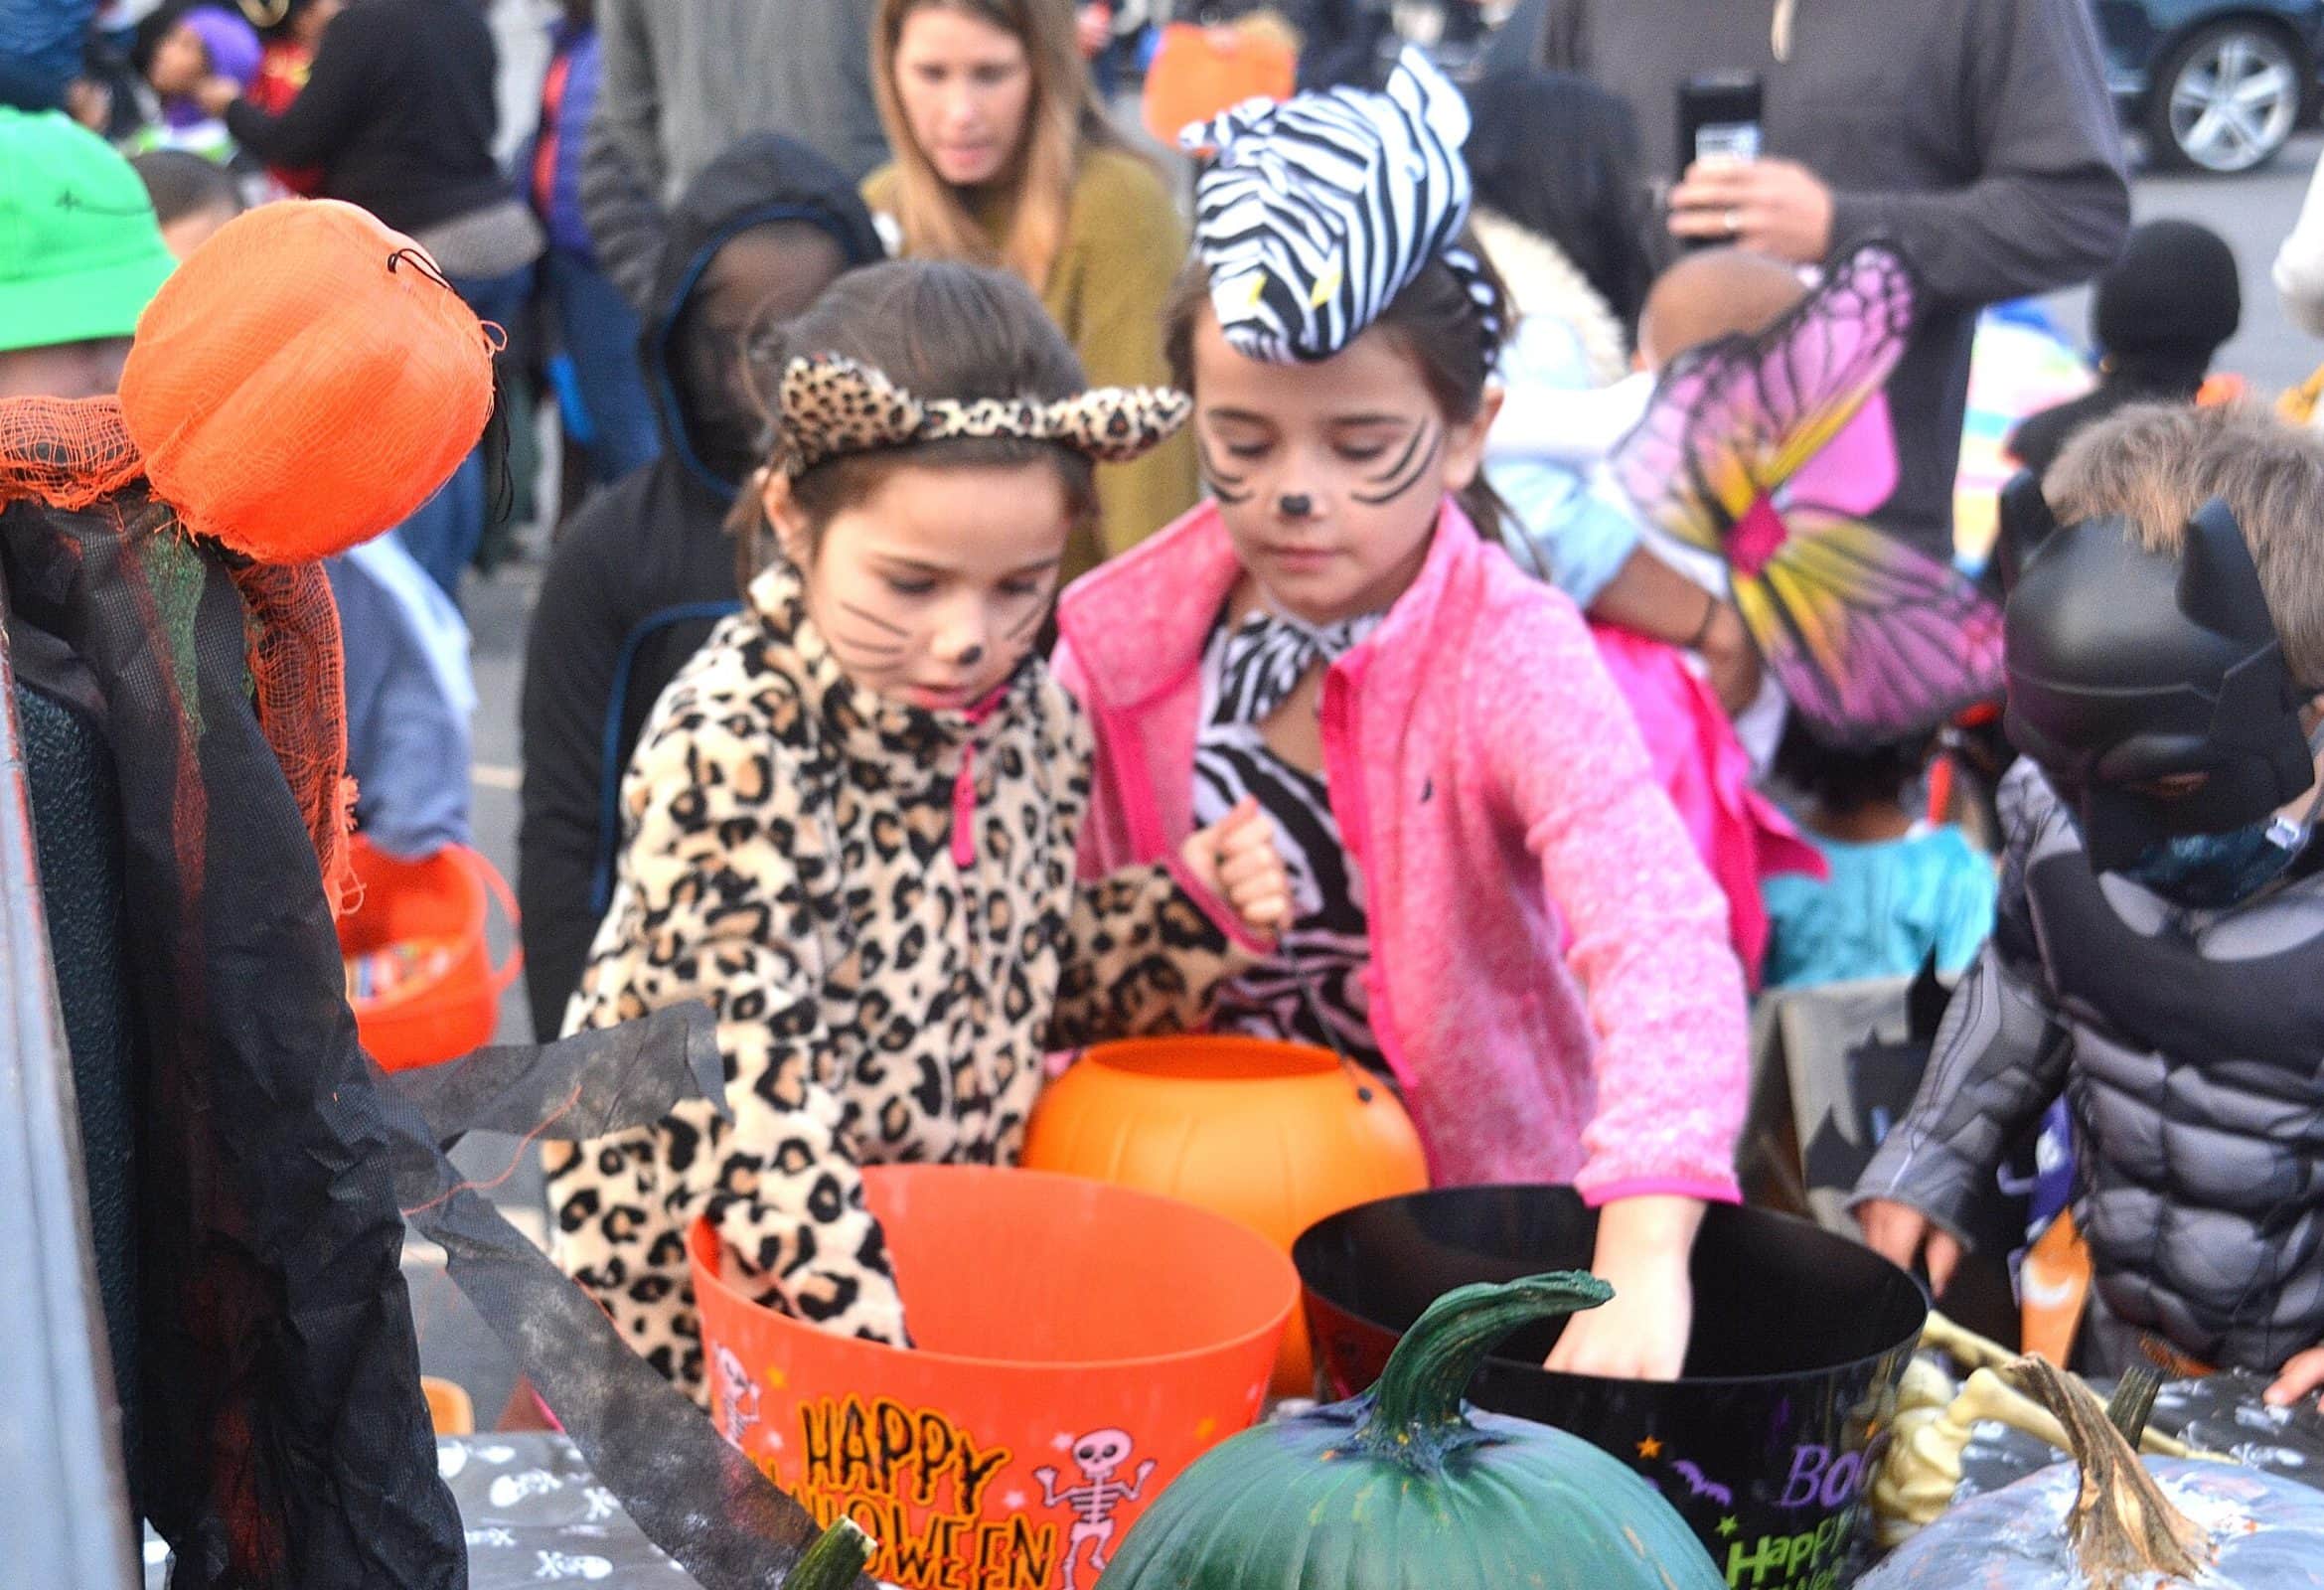 The Hickey sisters – Scarlett, 5, costumed as a cheetah, and Tessa, 6-1/2, as a zebra – get treats from the trunk of Chestnut Hill Farm.